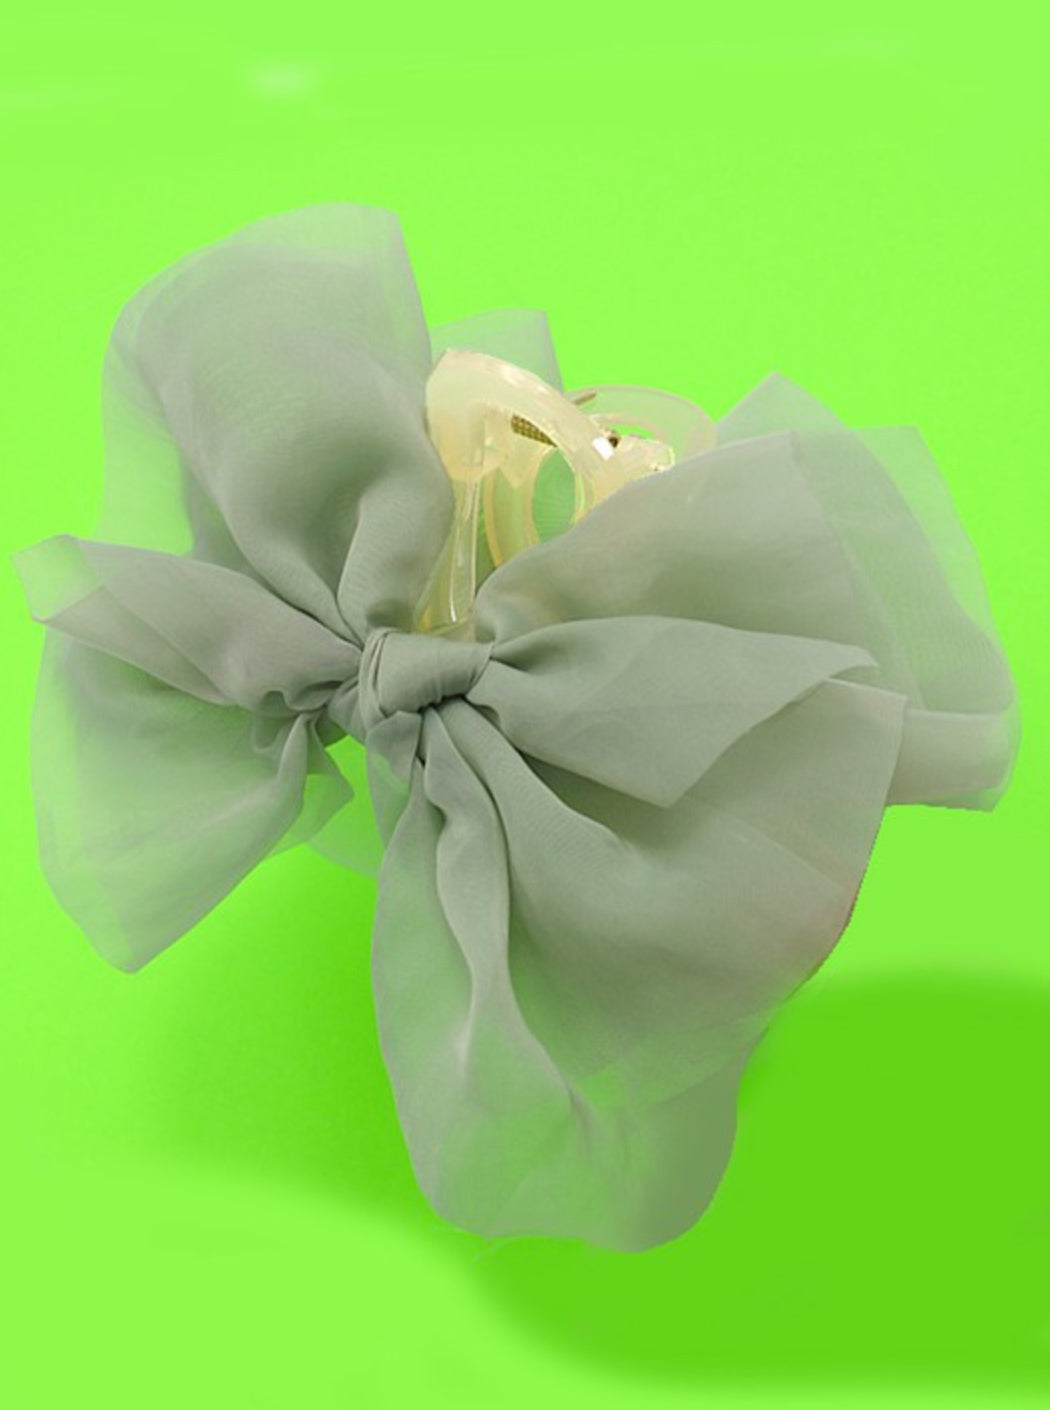 Bow Hair Clip (More colors available)